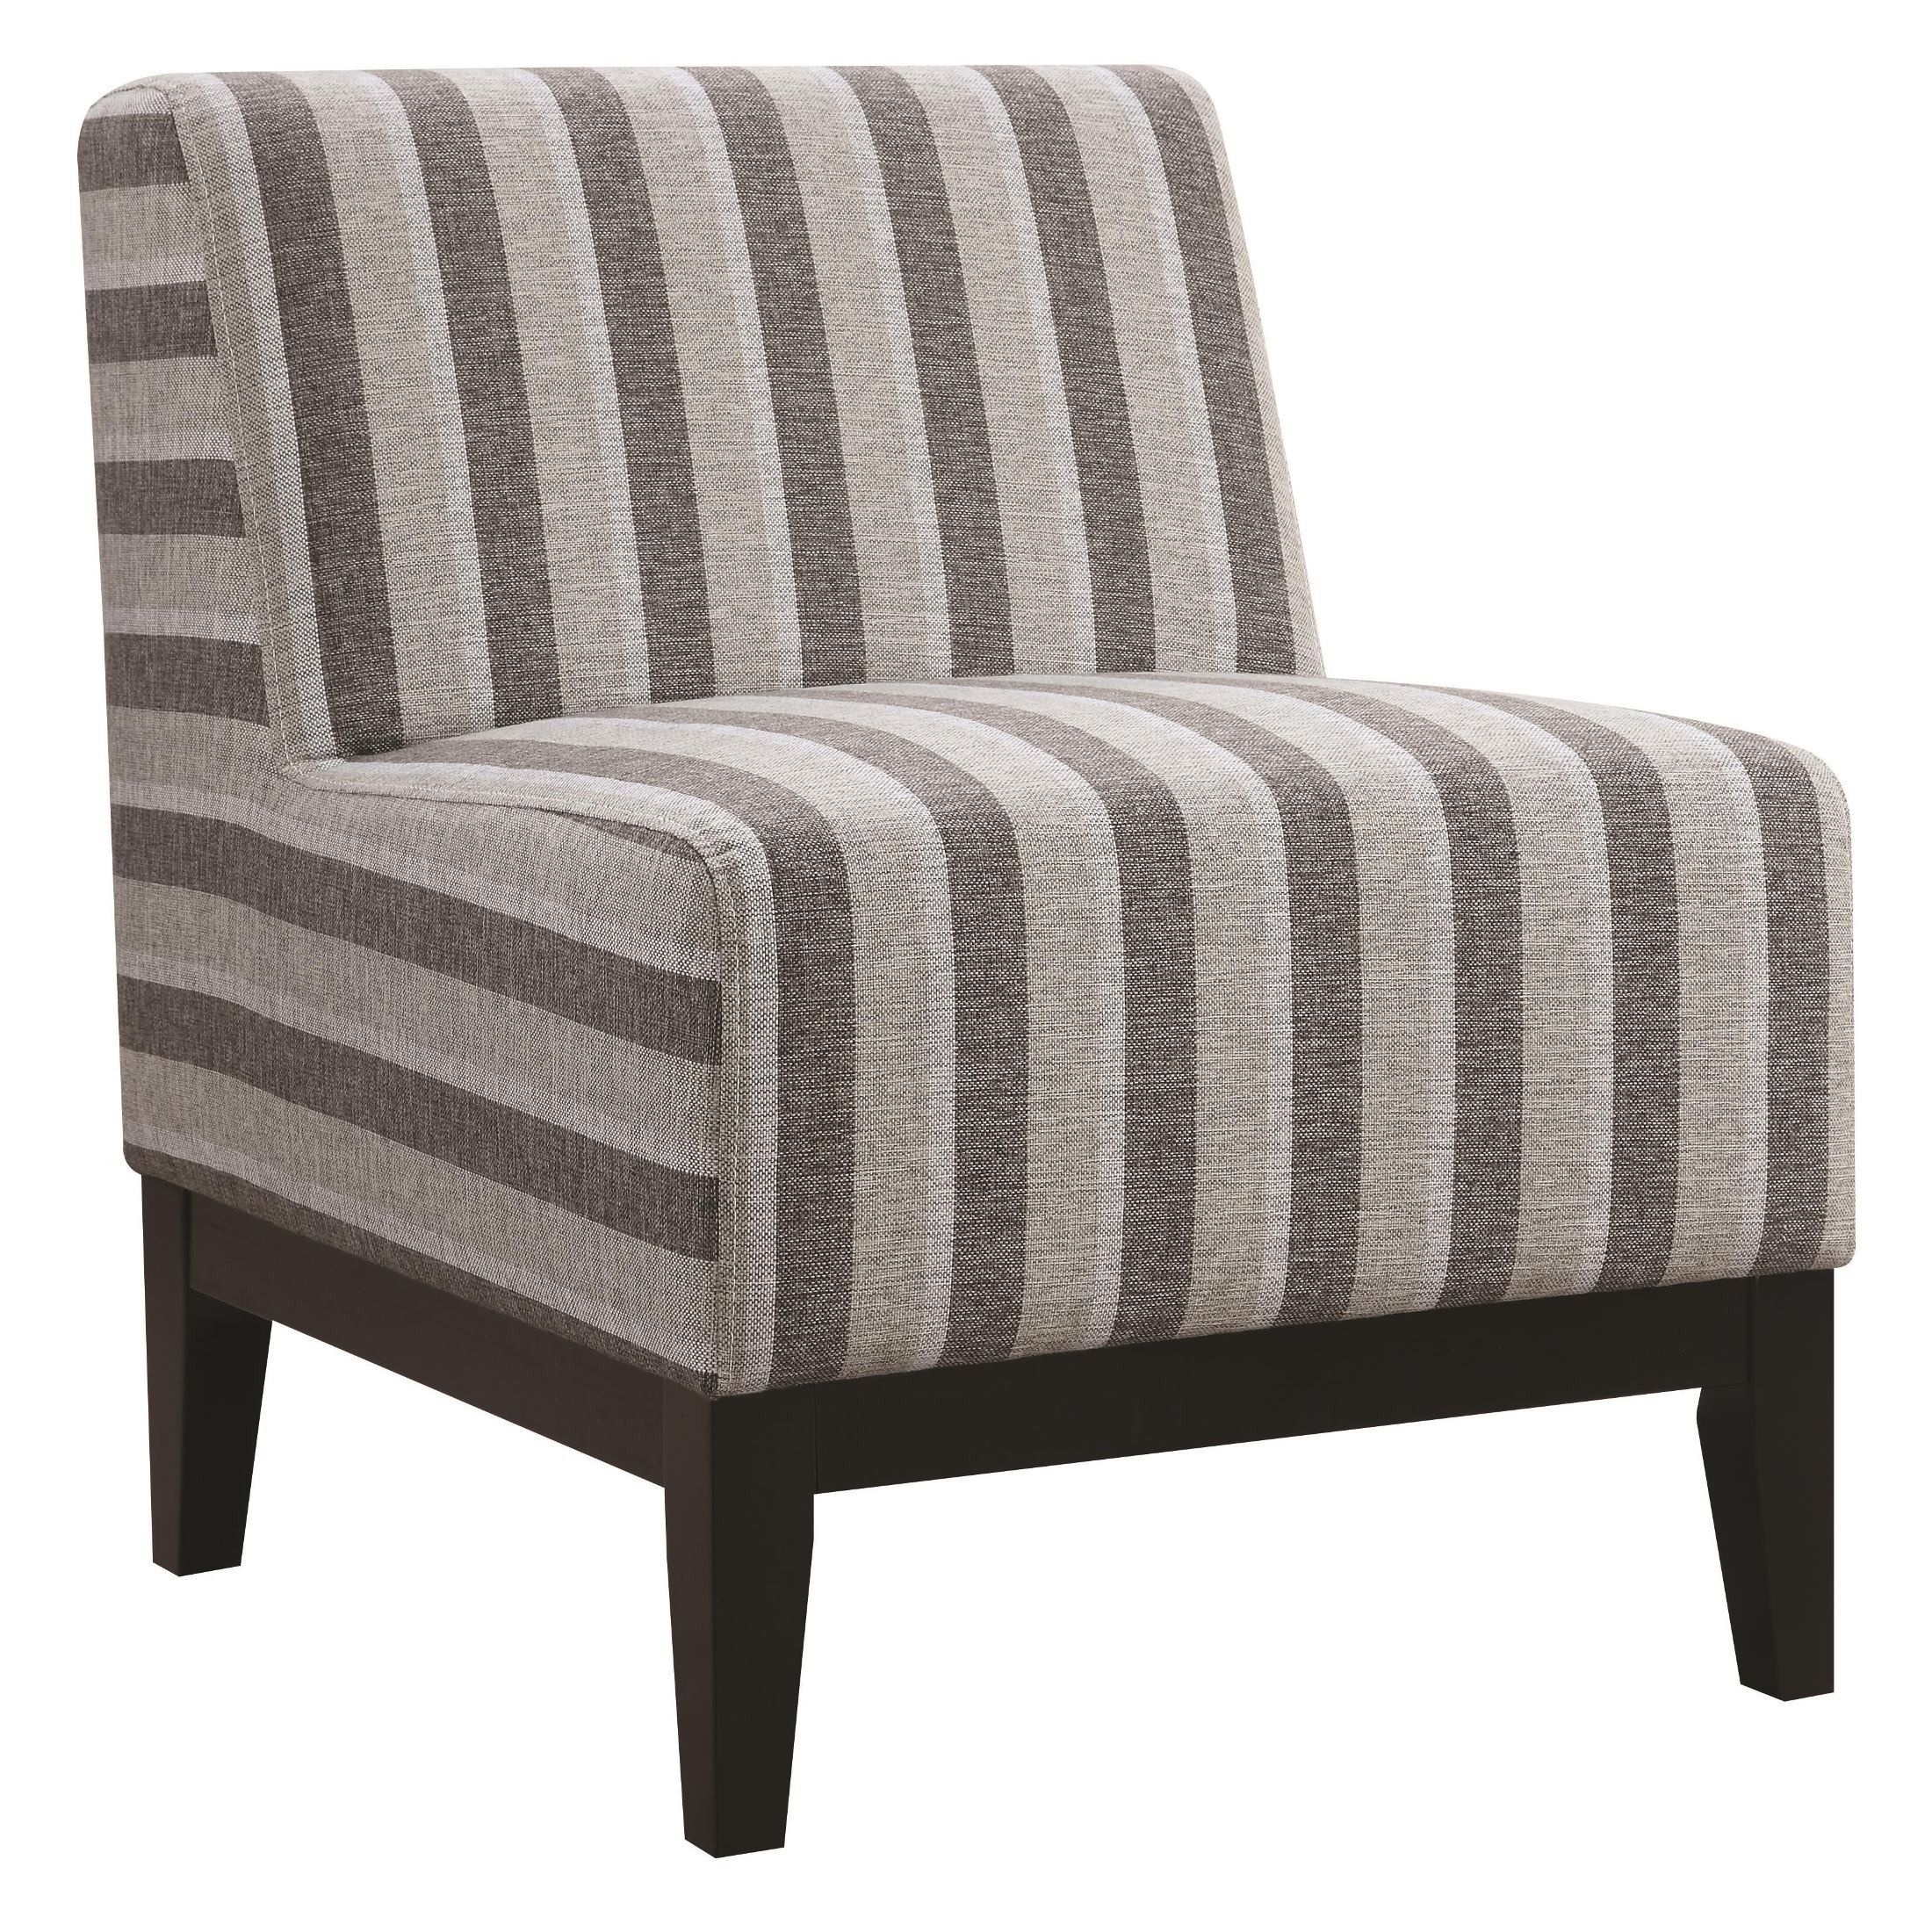 Thick Grey Striped Accent Chair From Coaster (902610) | Coleman Furniture In Smoke Gray Wood Accent Stools (View 4 of 20)